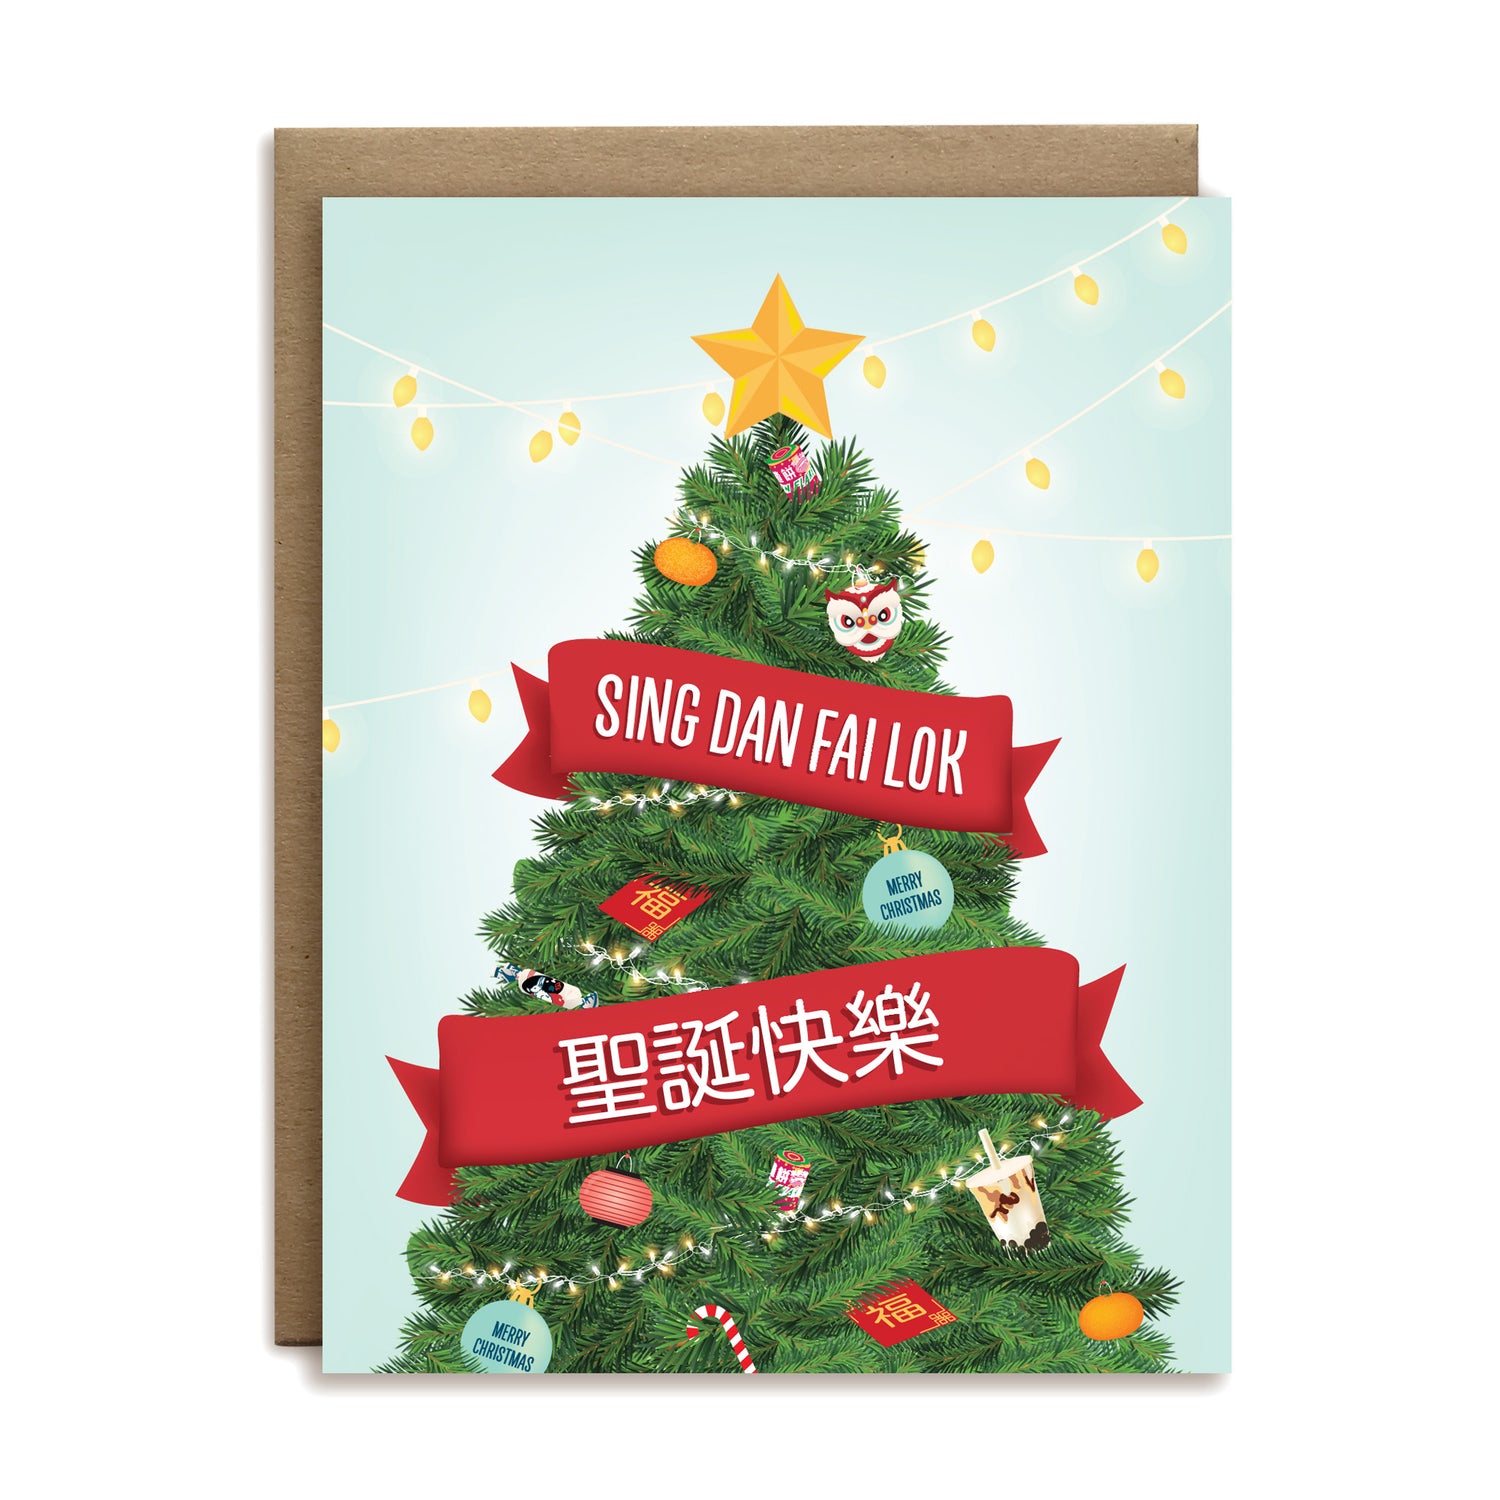 Sing Dan Fai Lok Chinese Cantonese English holiday greeting card by I’ll Know It When I See It